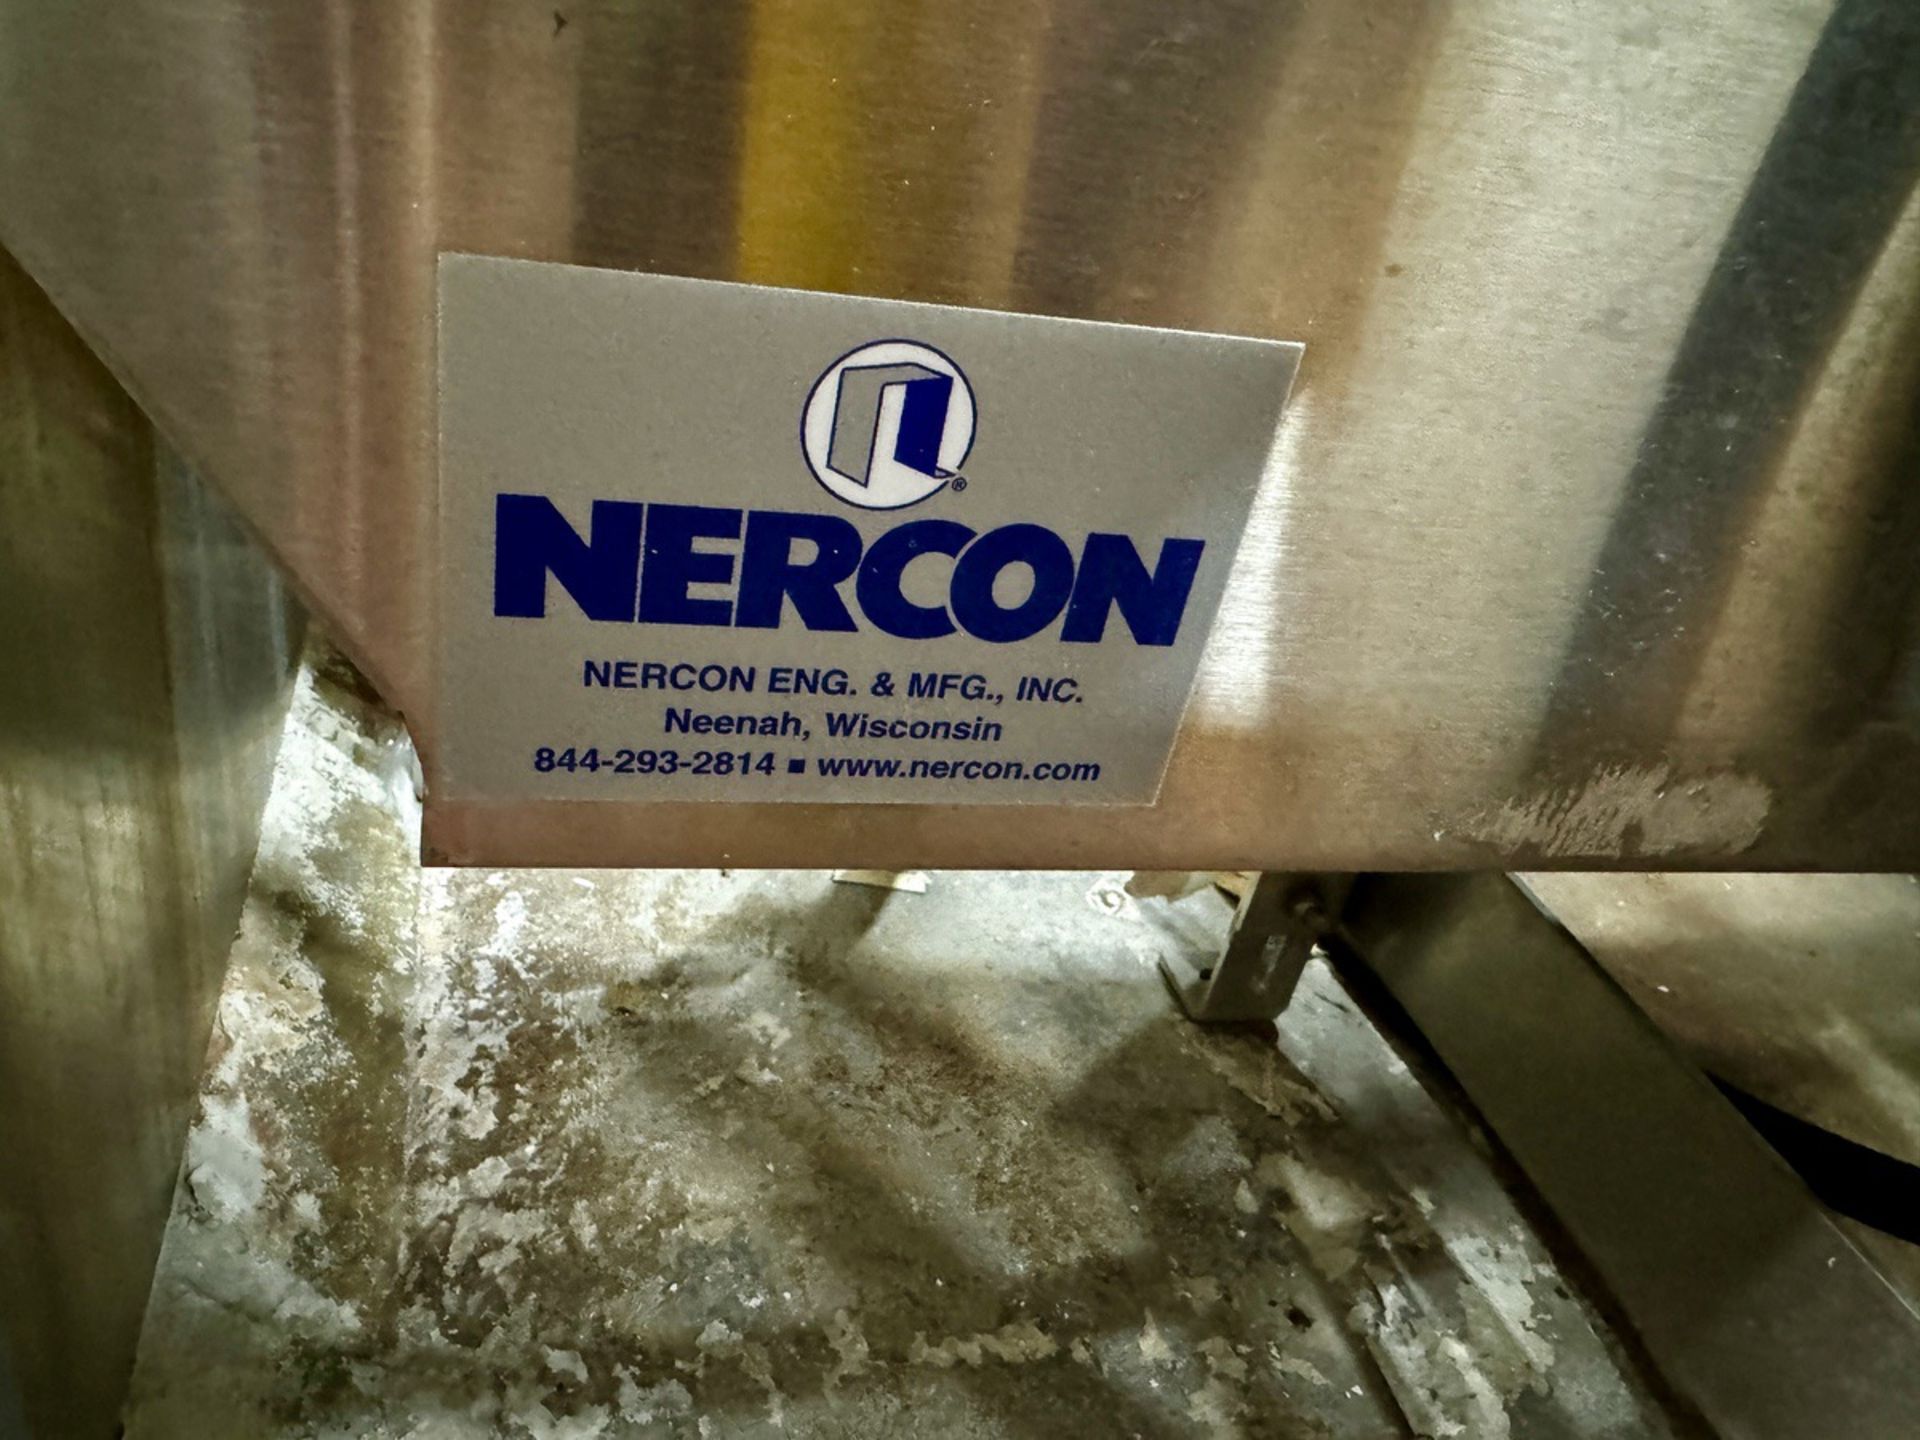 Nercon Stainless Steel Frame 180 Degree Conveyor, 8" Wide Belt, Washdown Drive with Variable Speed C - Image 2 of 4